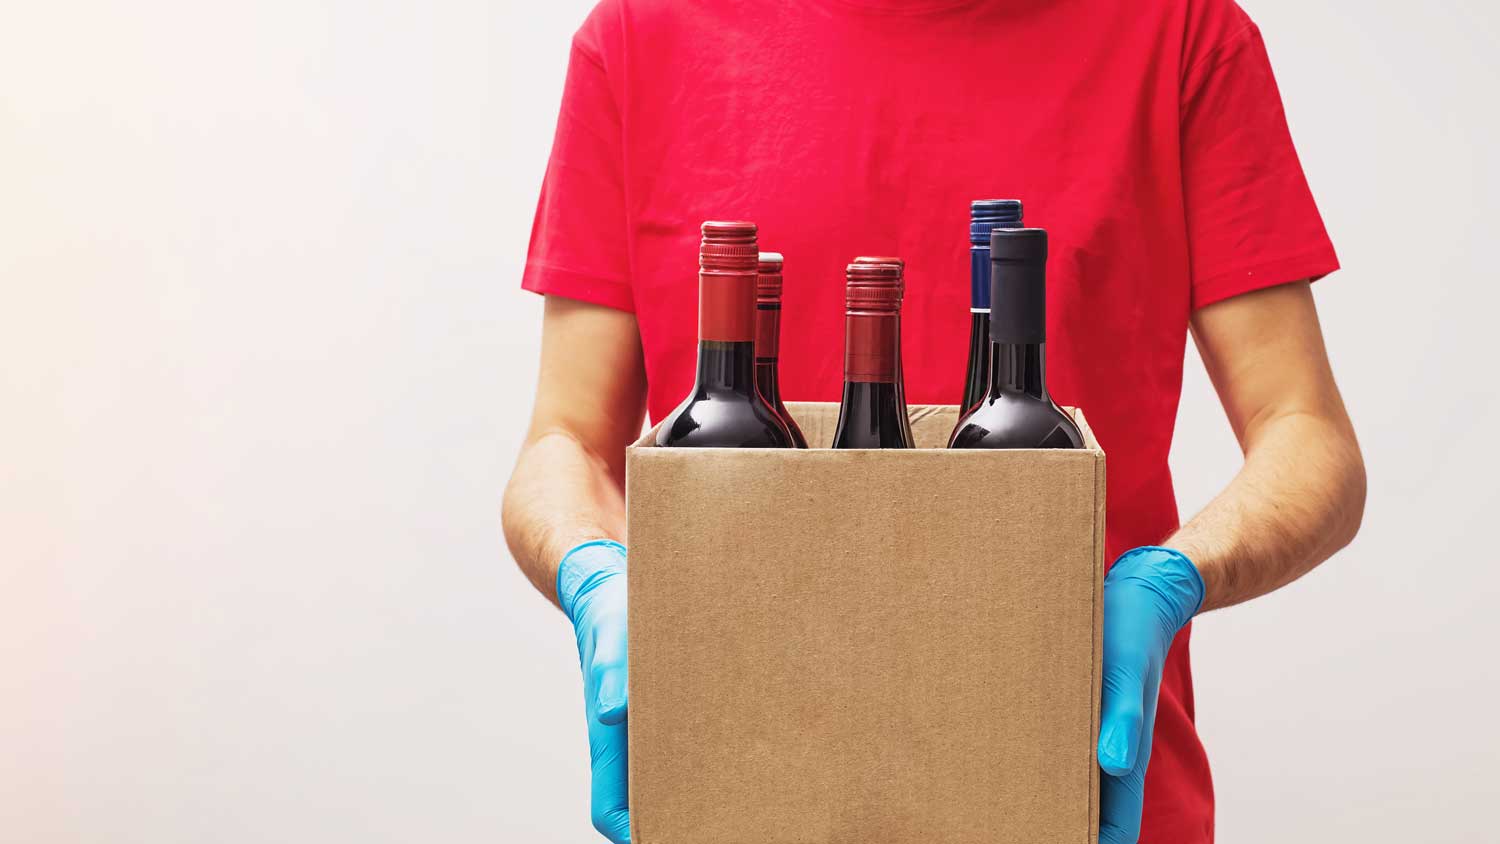 Home Delivery of Alcohol: Convenient or Problematic?